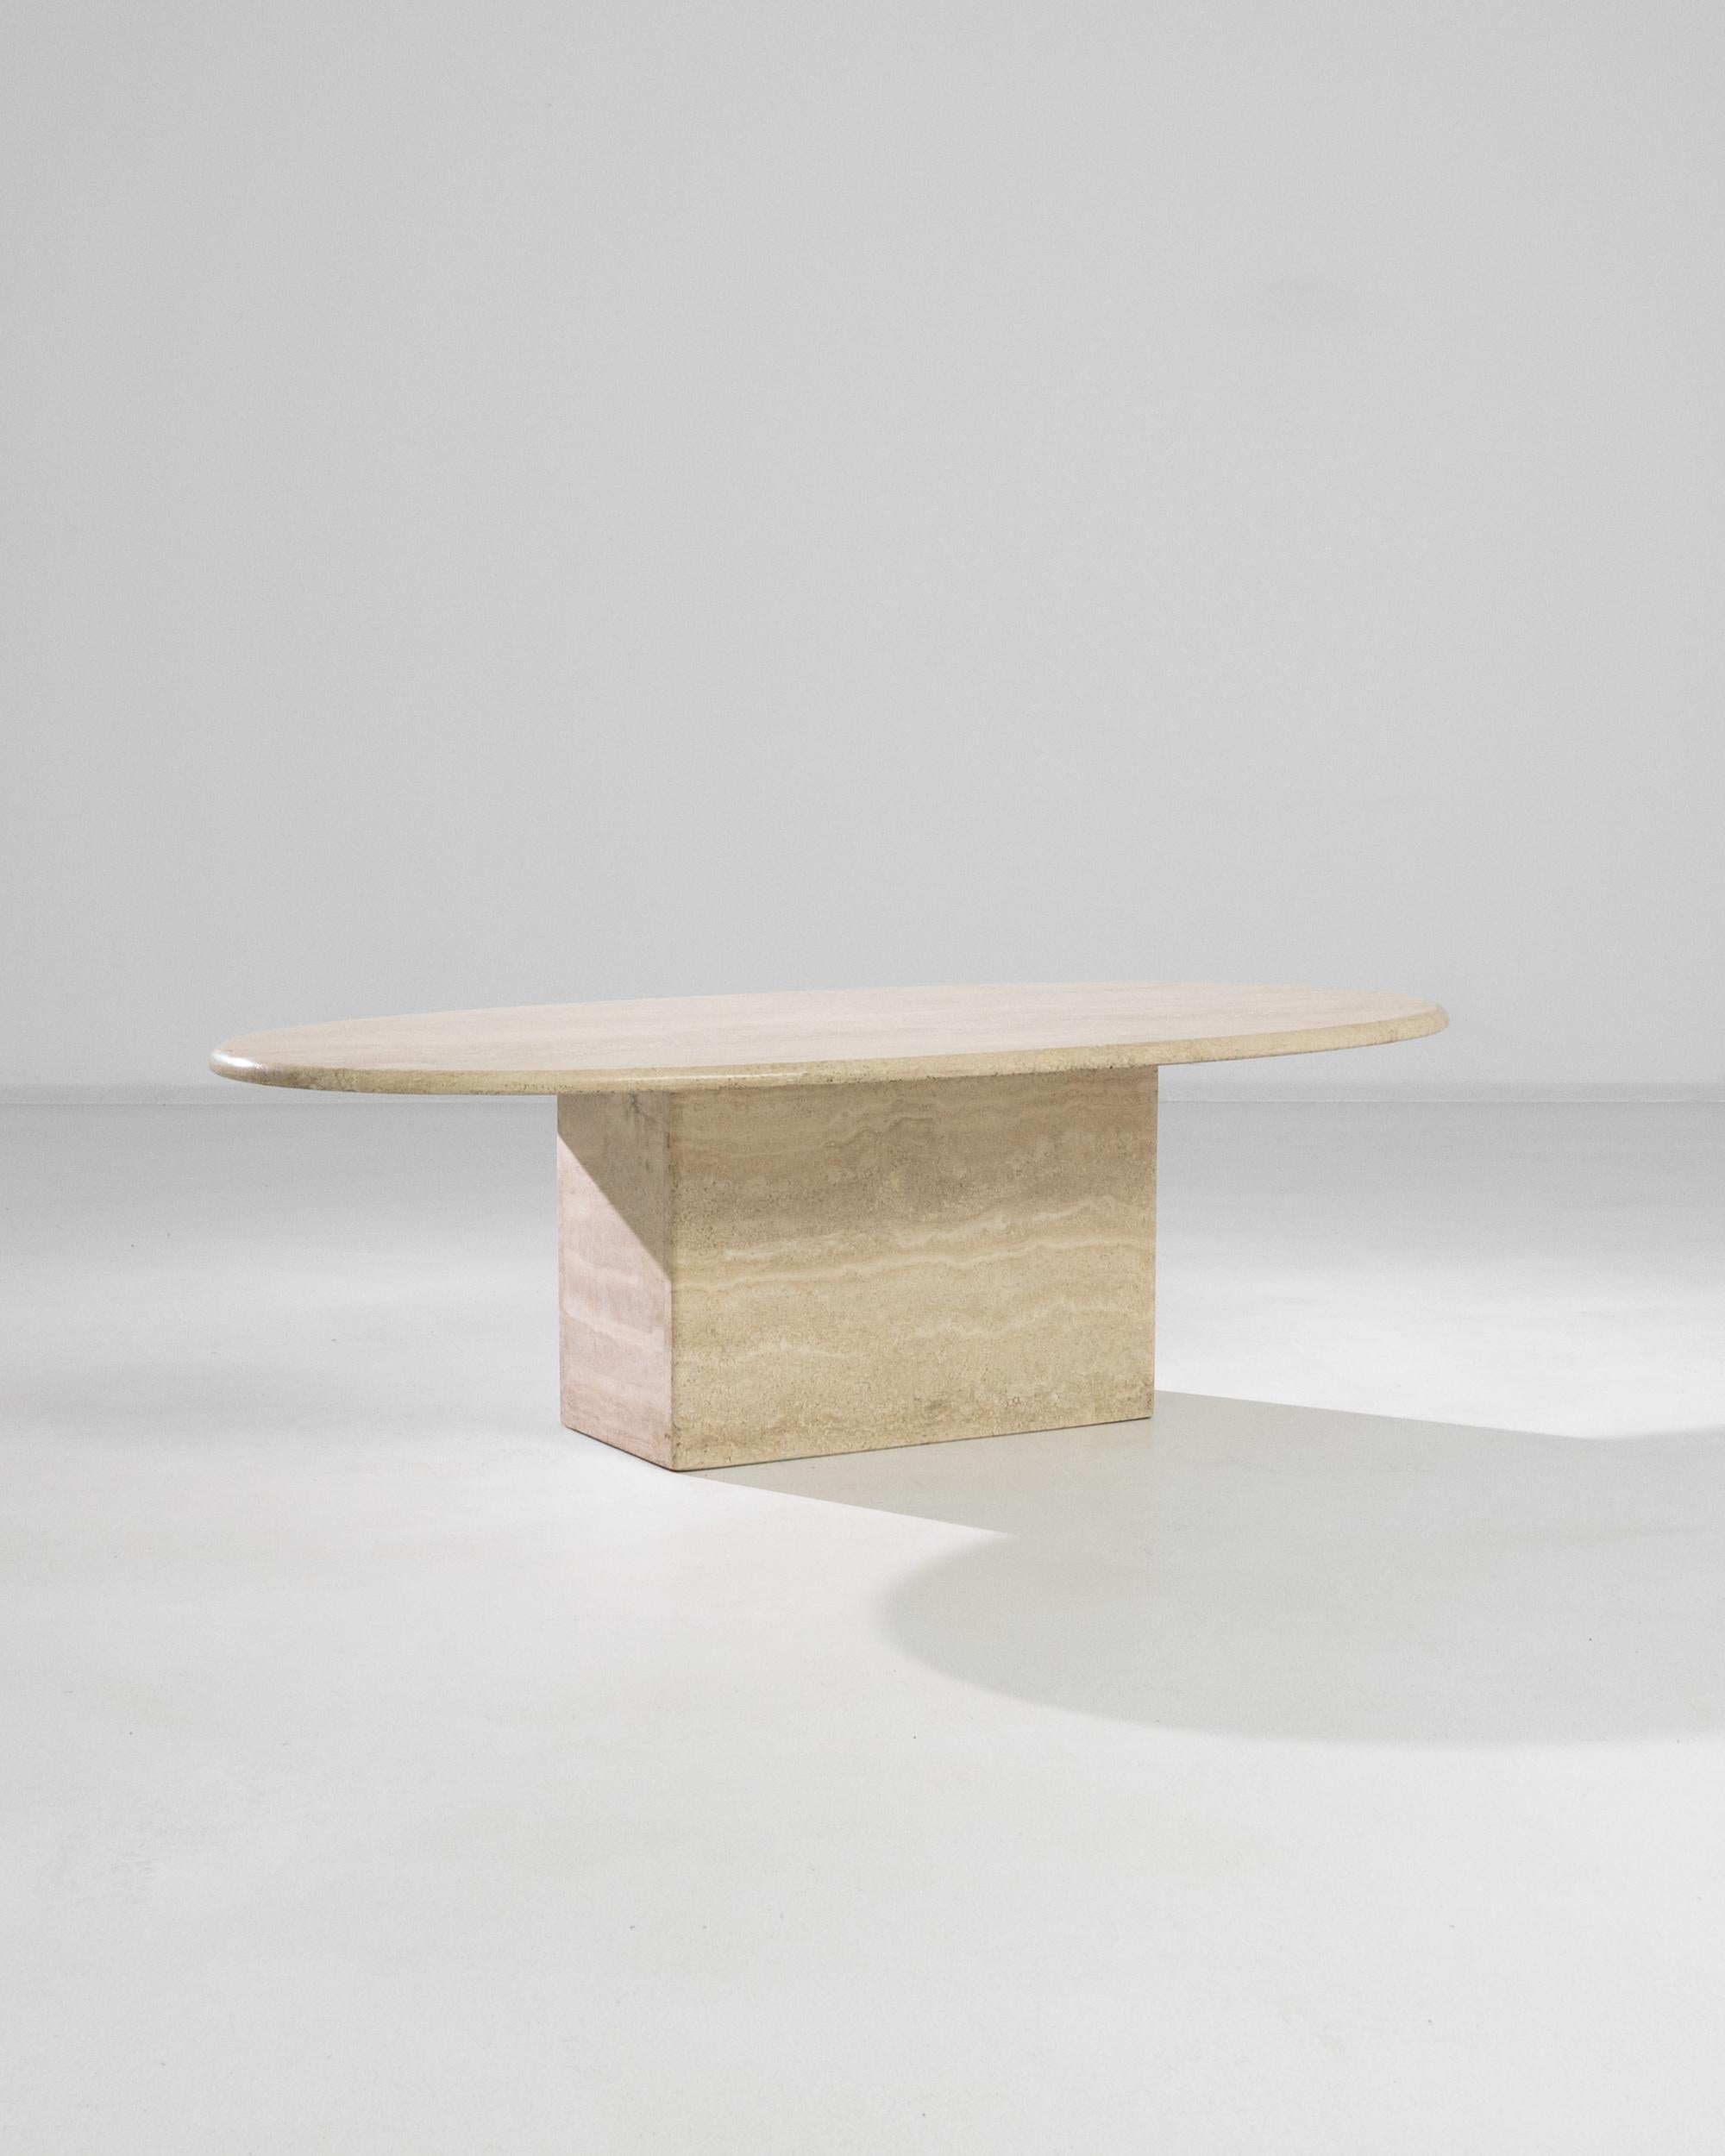 A cantilevered slab of textured travertine rests on a rectangular base in this stylish and simple coffee table. The tabletop is carved with a rounded edge profile.

Stone is a material rich in itself. Echoing classical sculpture, a design that's